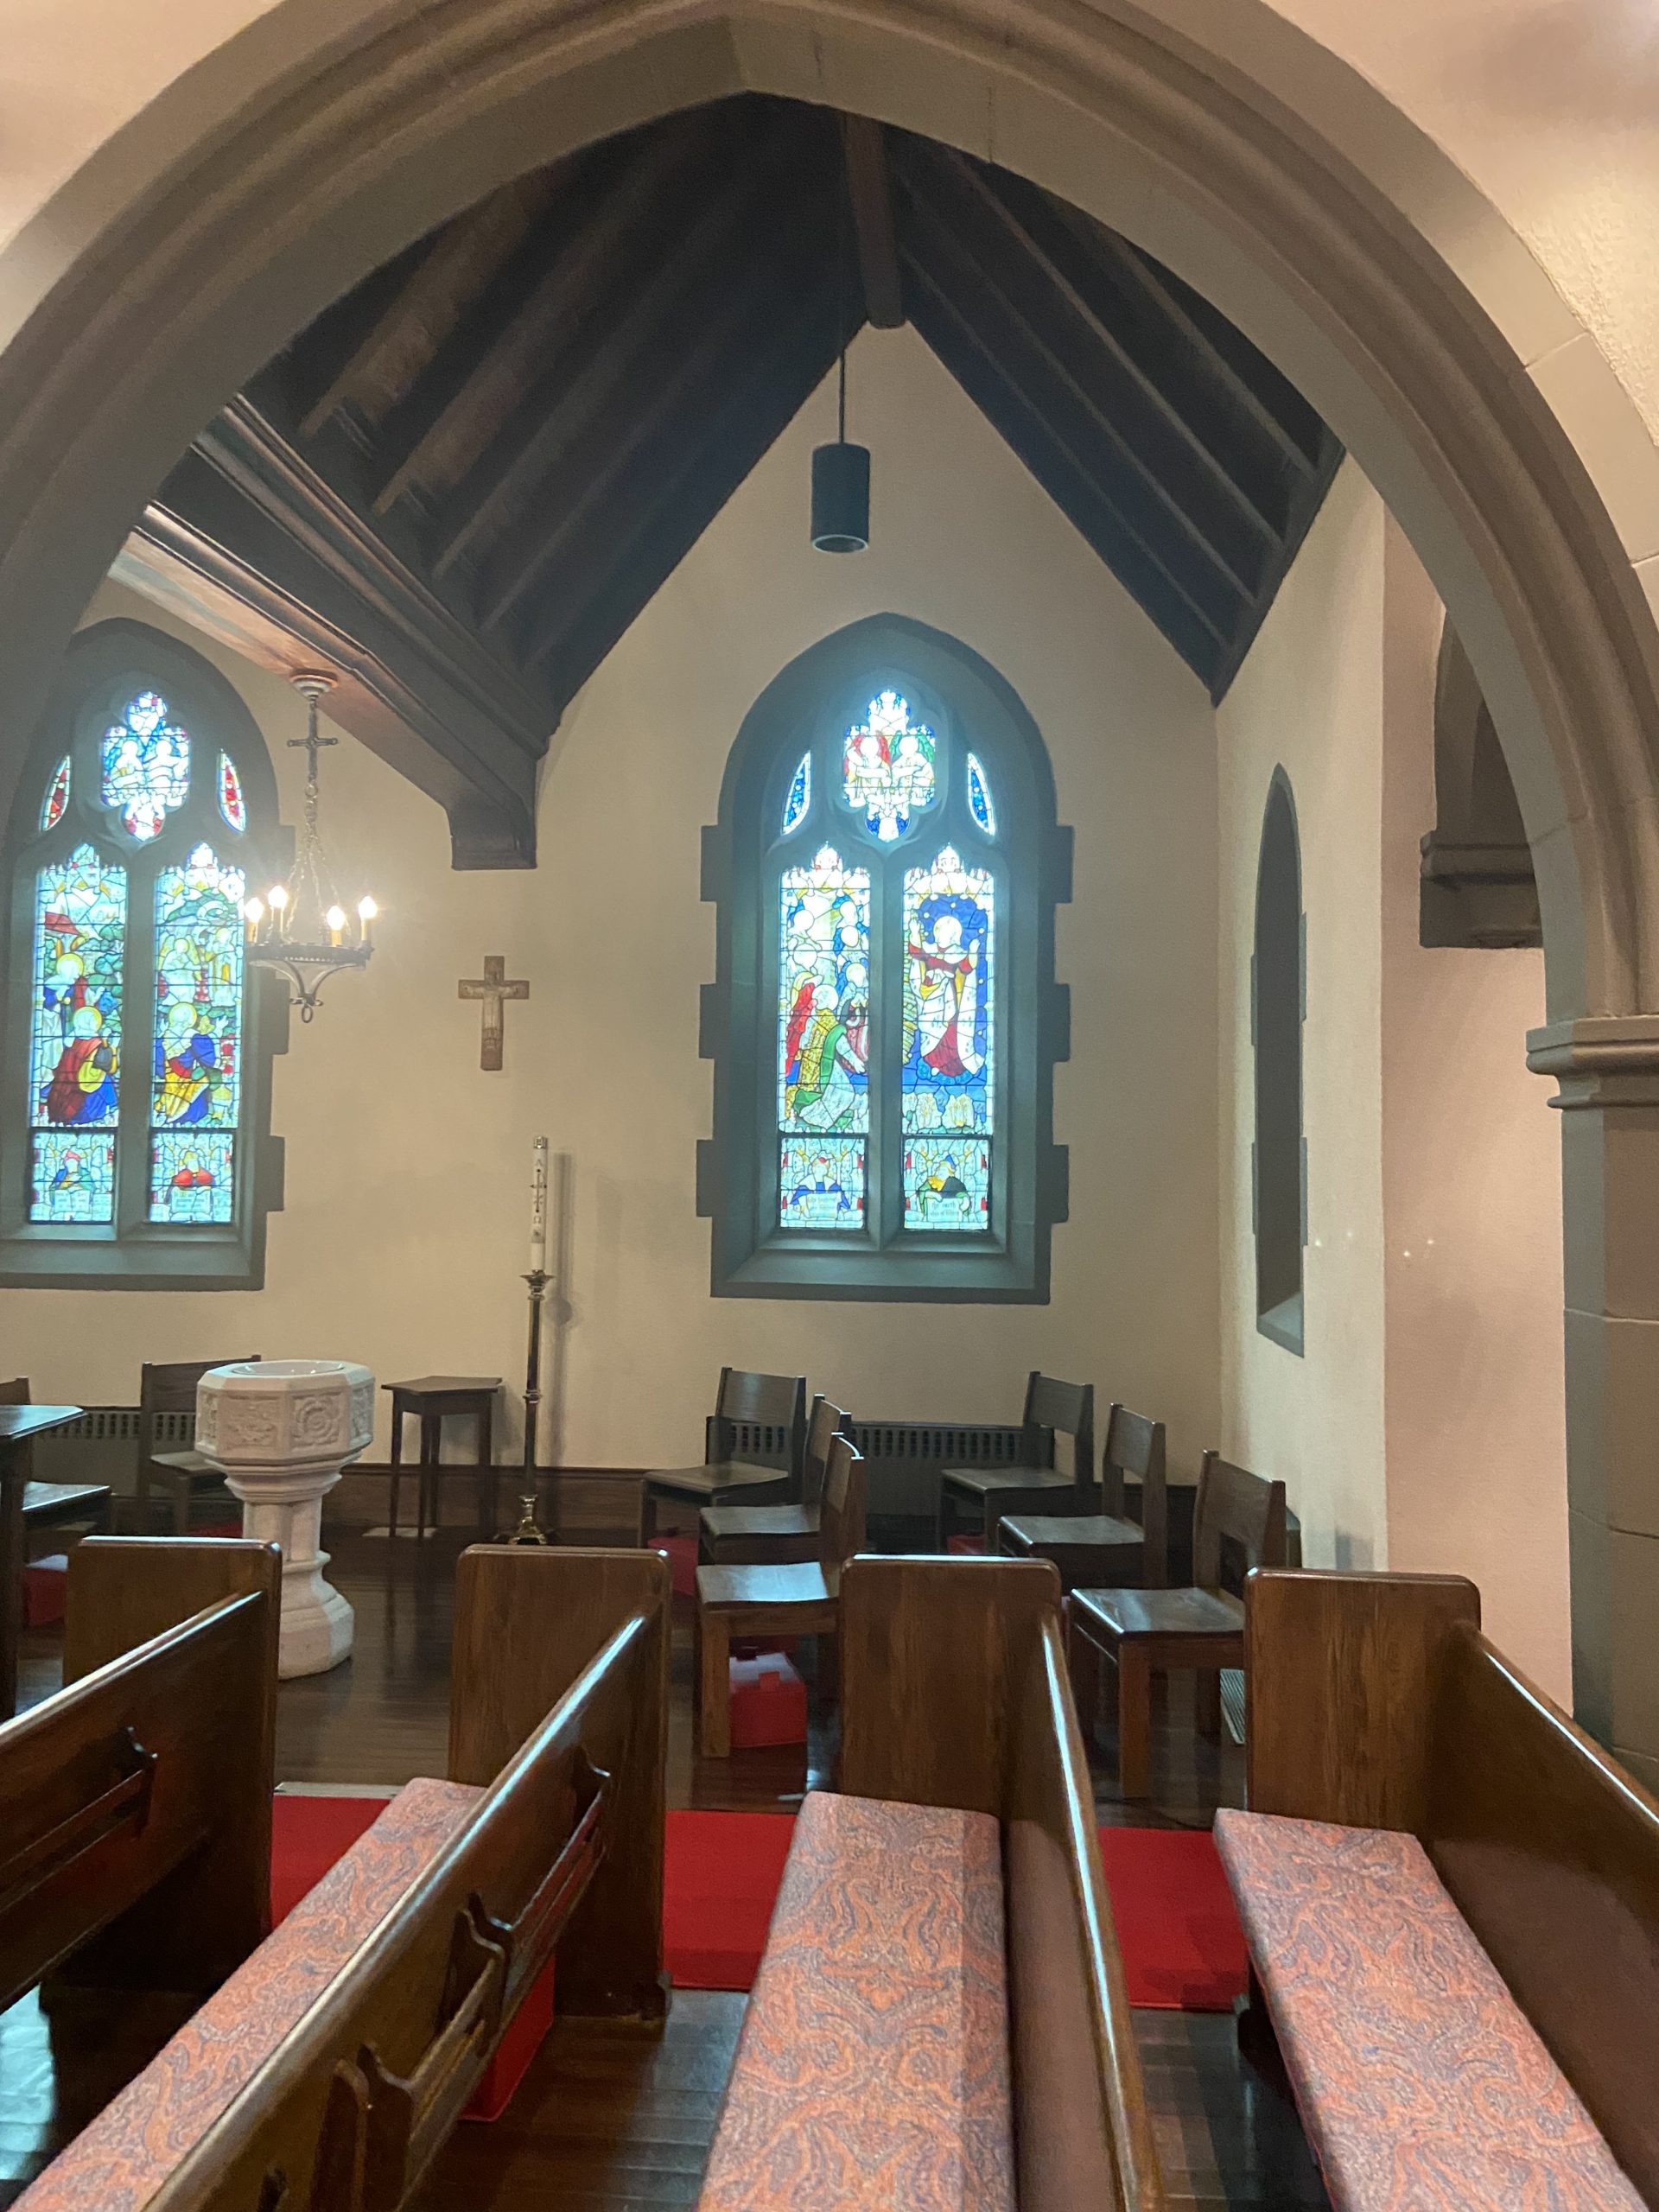 The stained glass windows at St. Luke's Episcopal Church in East Hampton